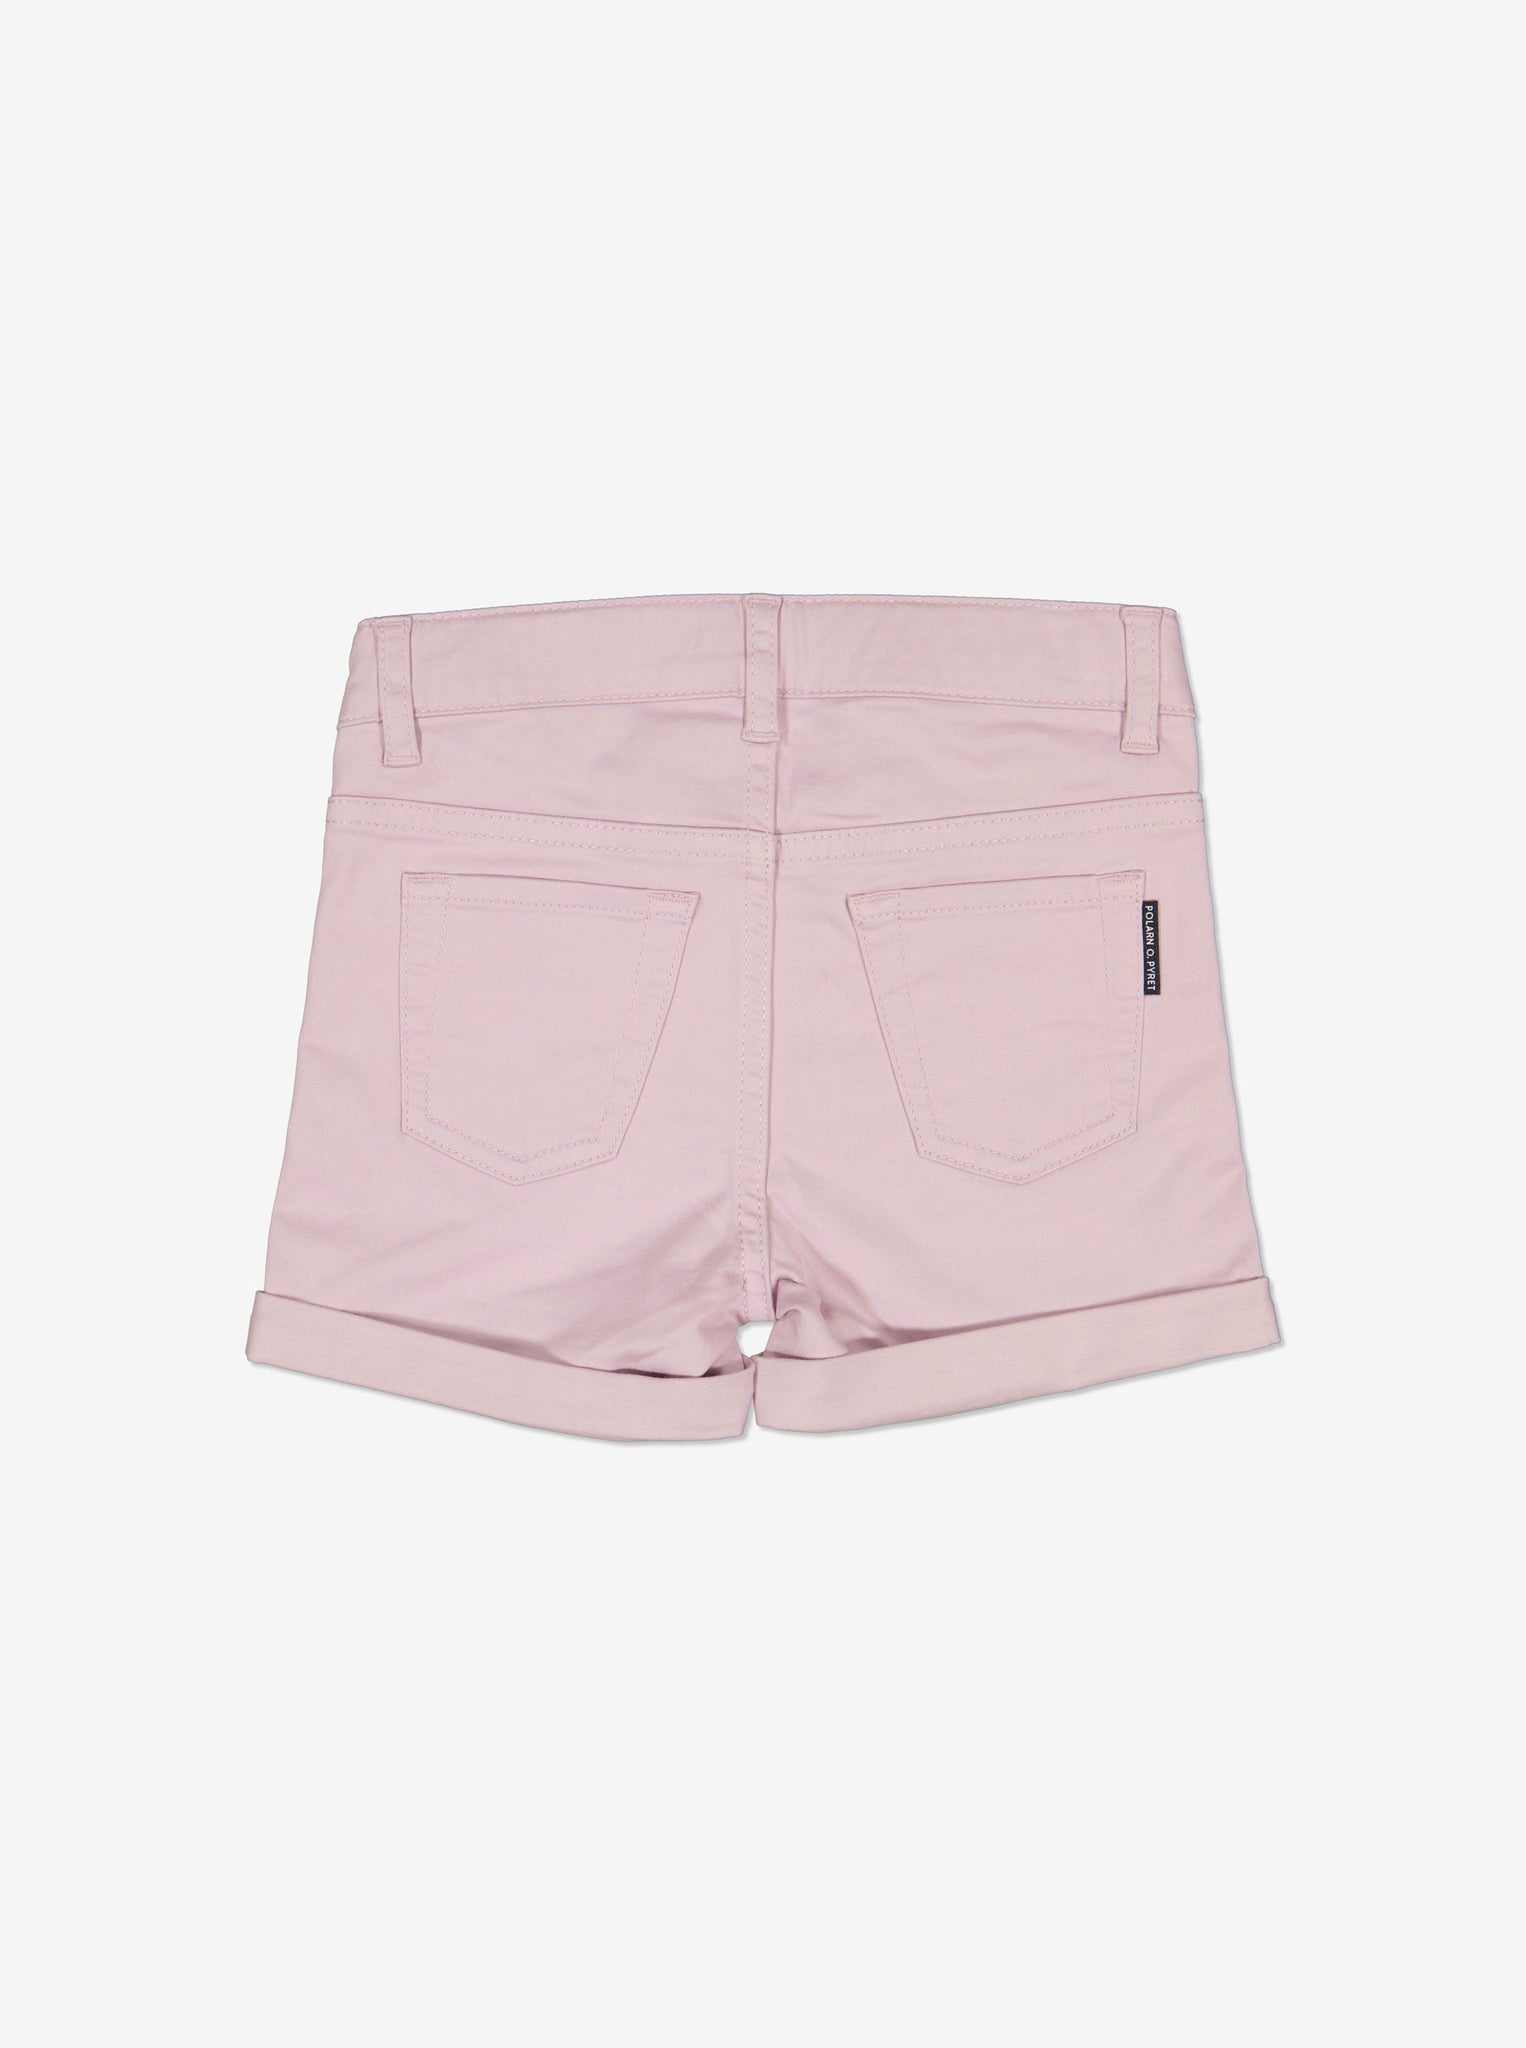  Kids Pink Denim Shorts from Polarn O. Pyret Kidswear. Made using sustainable materials.